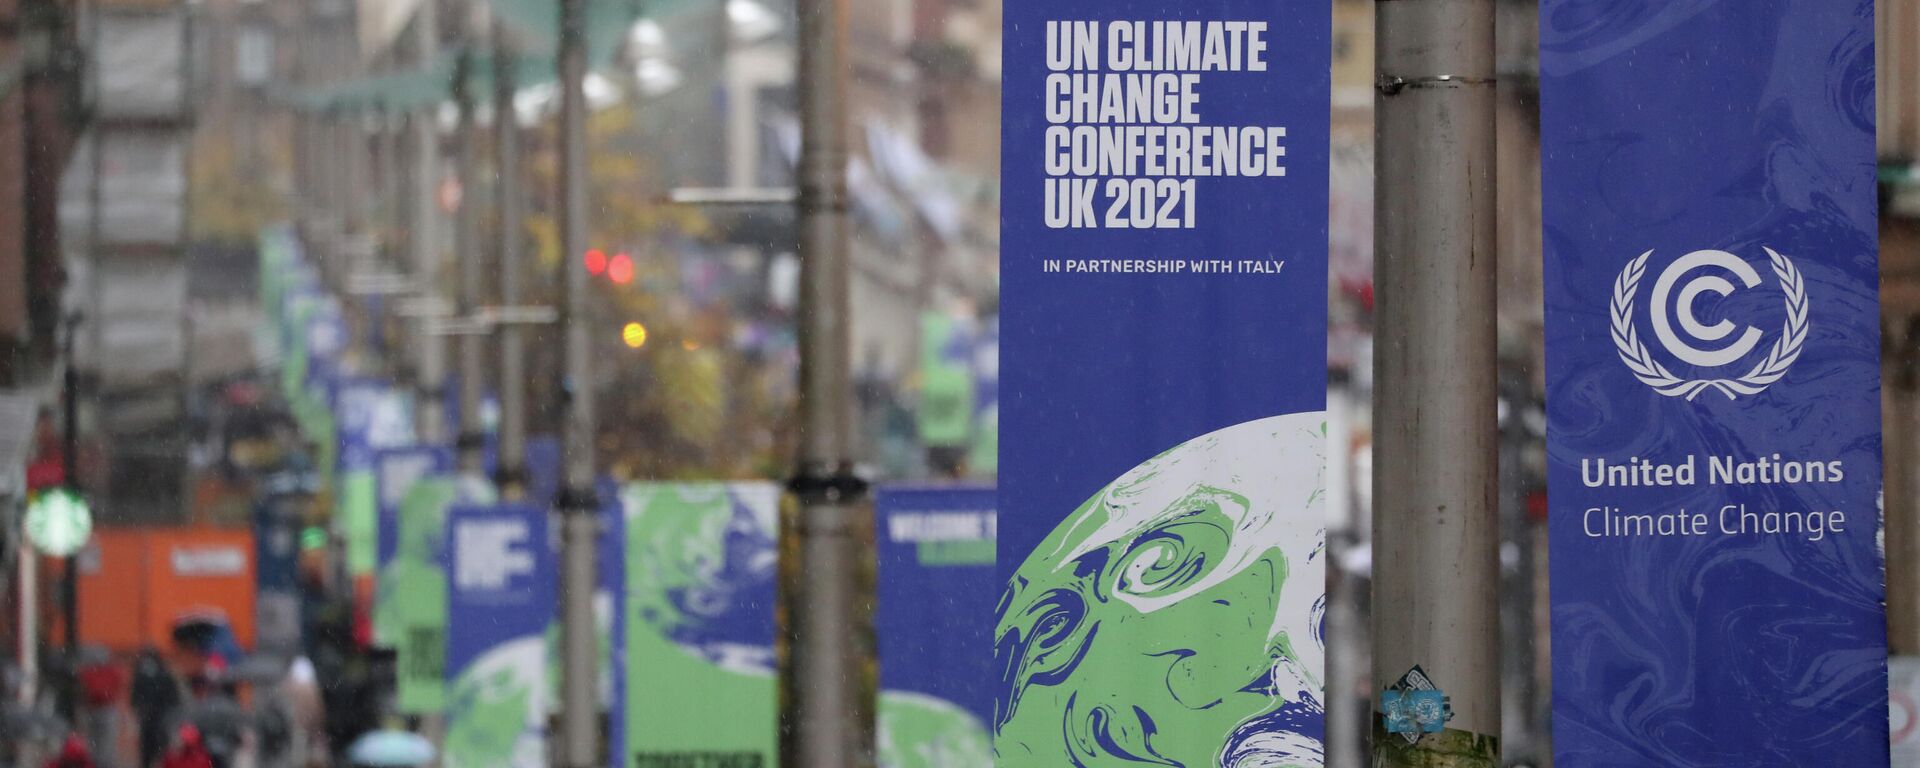 The view of banners displayed in central Glasgow, Scotland, Friday, Oct. 29, 2021. The U.N. climate conference COP26 starts Sunday in Glasgow.  - Sputnik International, 1920, 31.10.2021